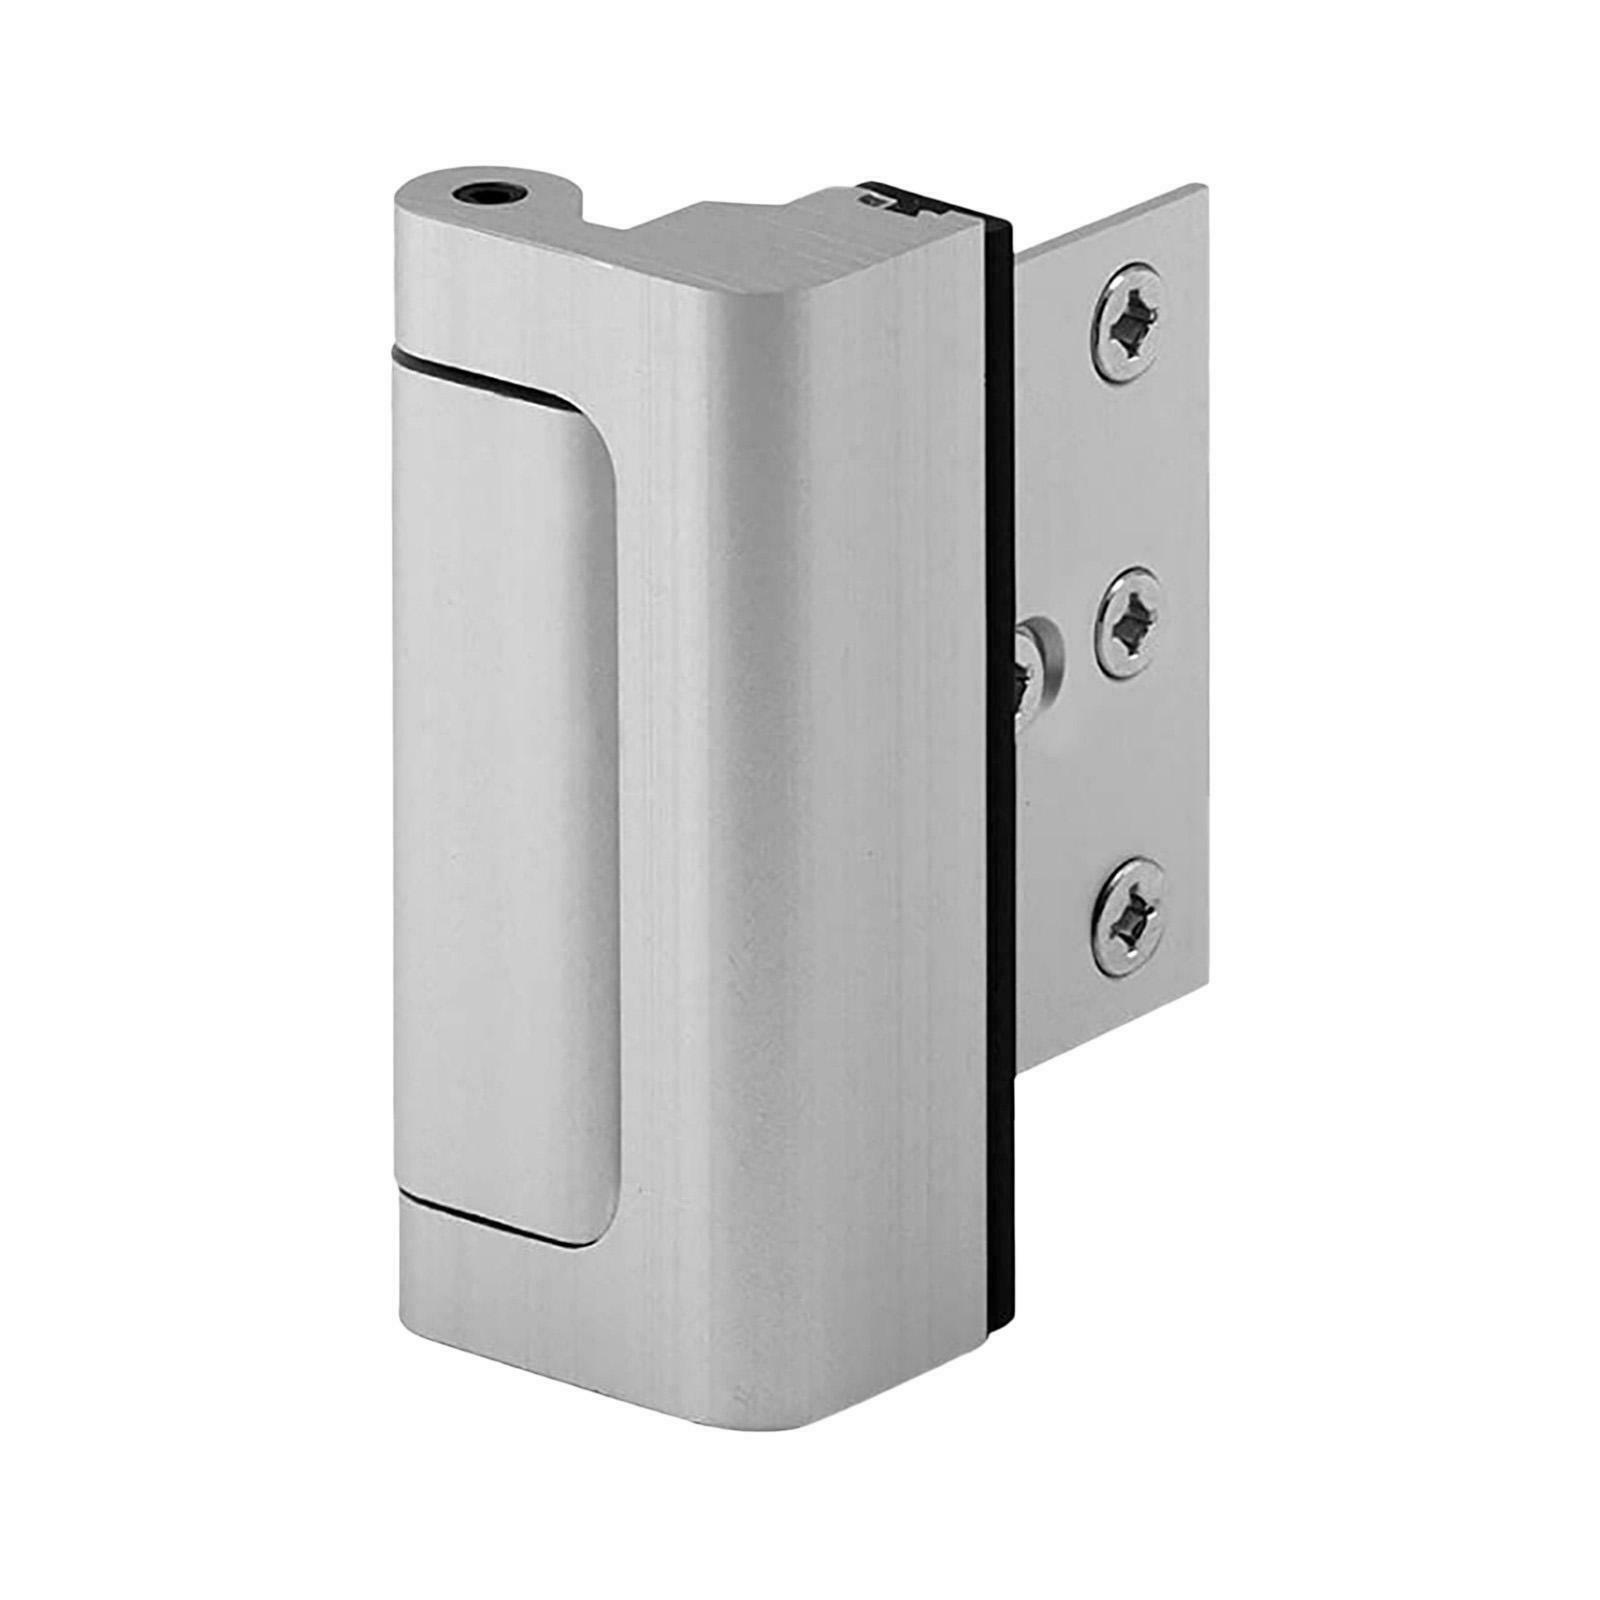 Home Security Door Lock Guard Latch Device for Safety Inward Swinging Home